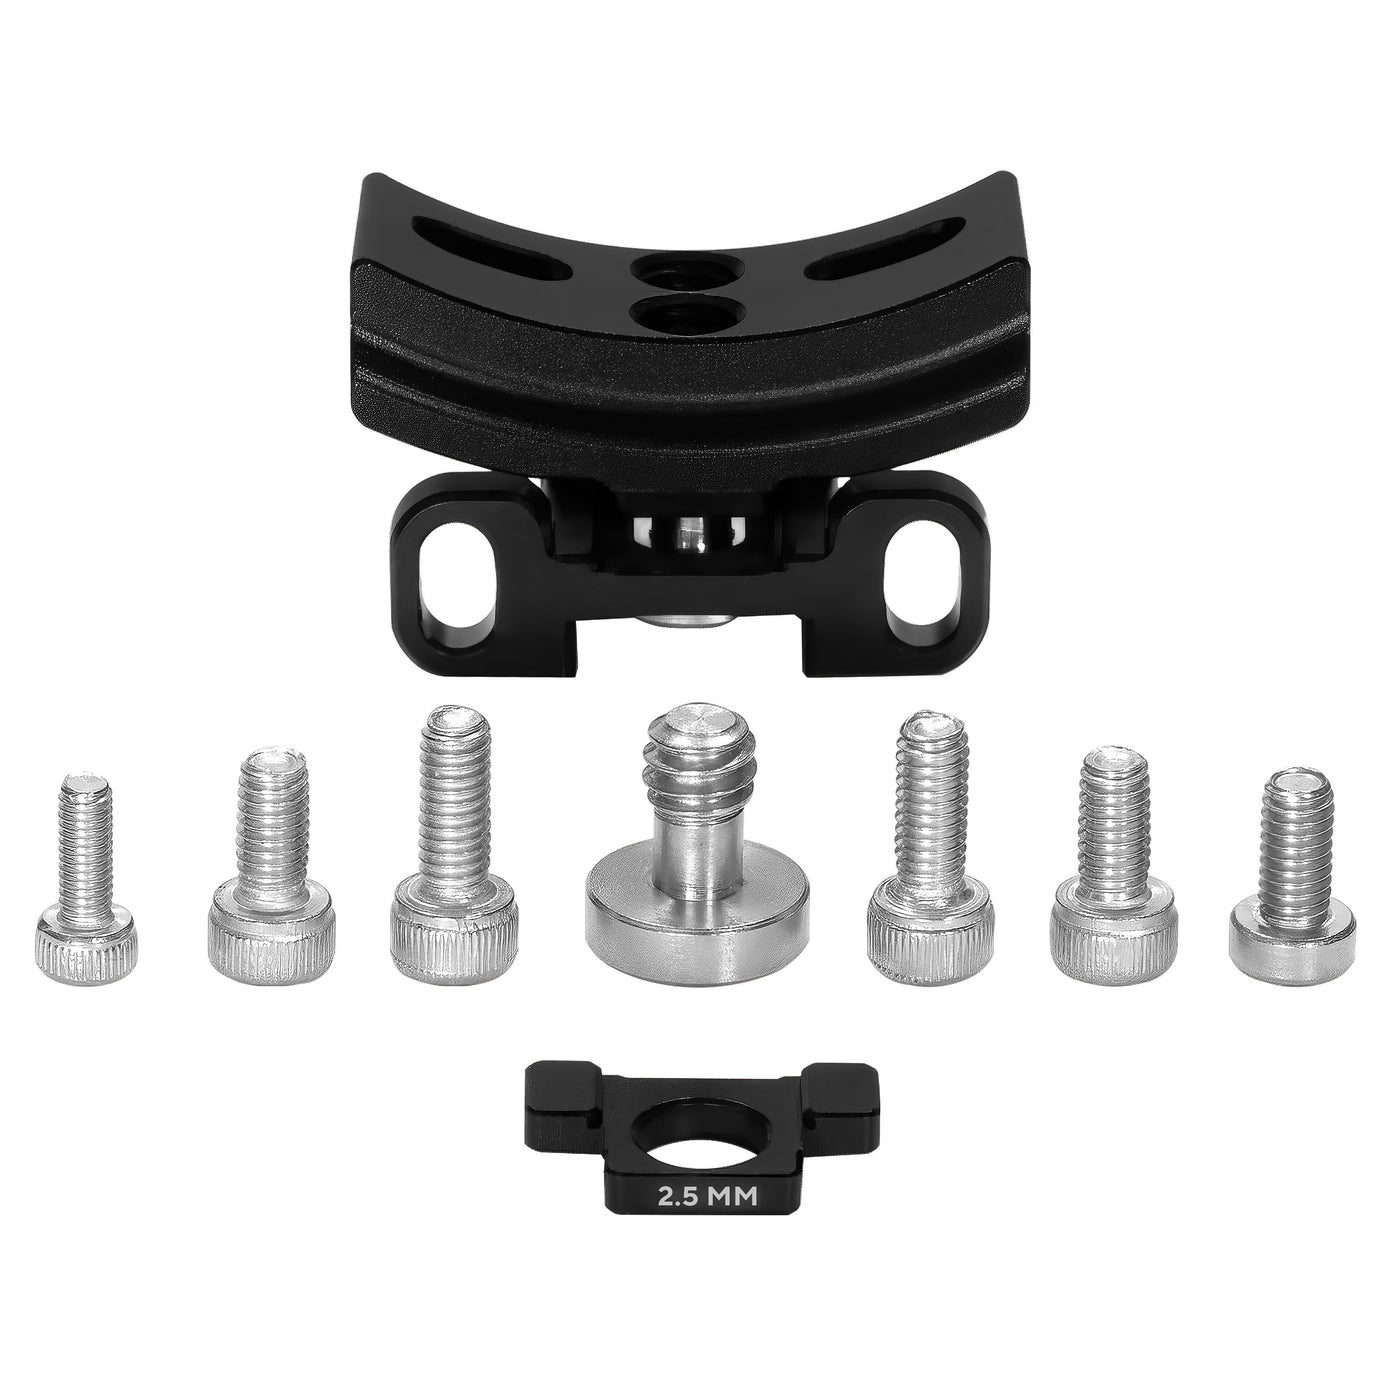 RF Lens Mount Bracket for Speed Boosters & Adapters